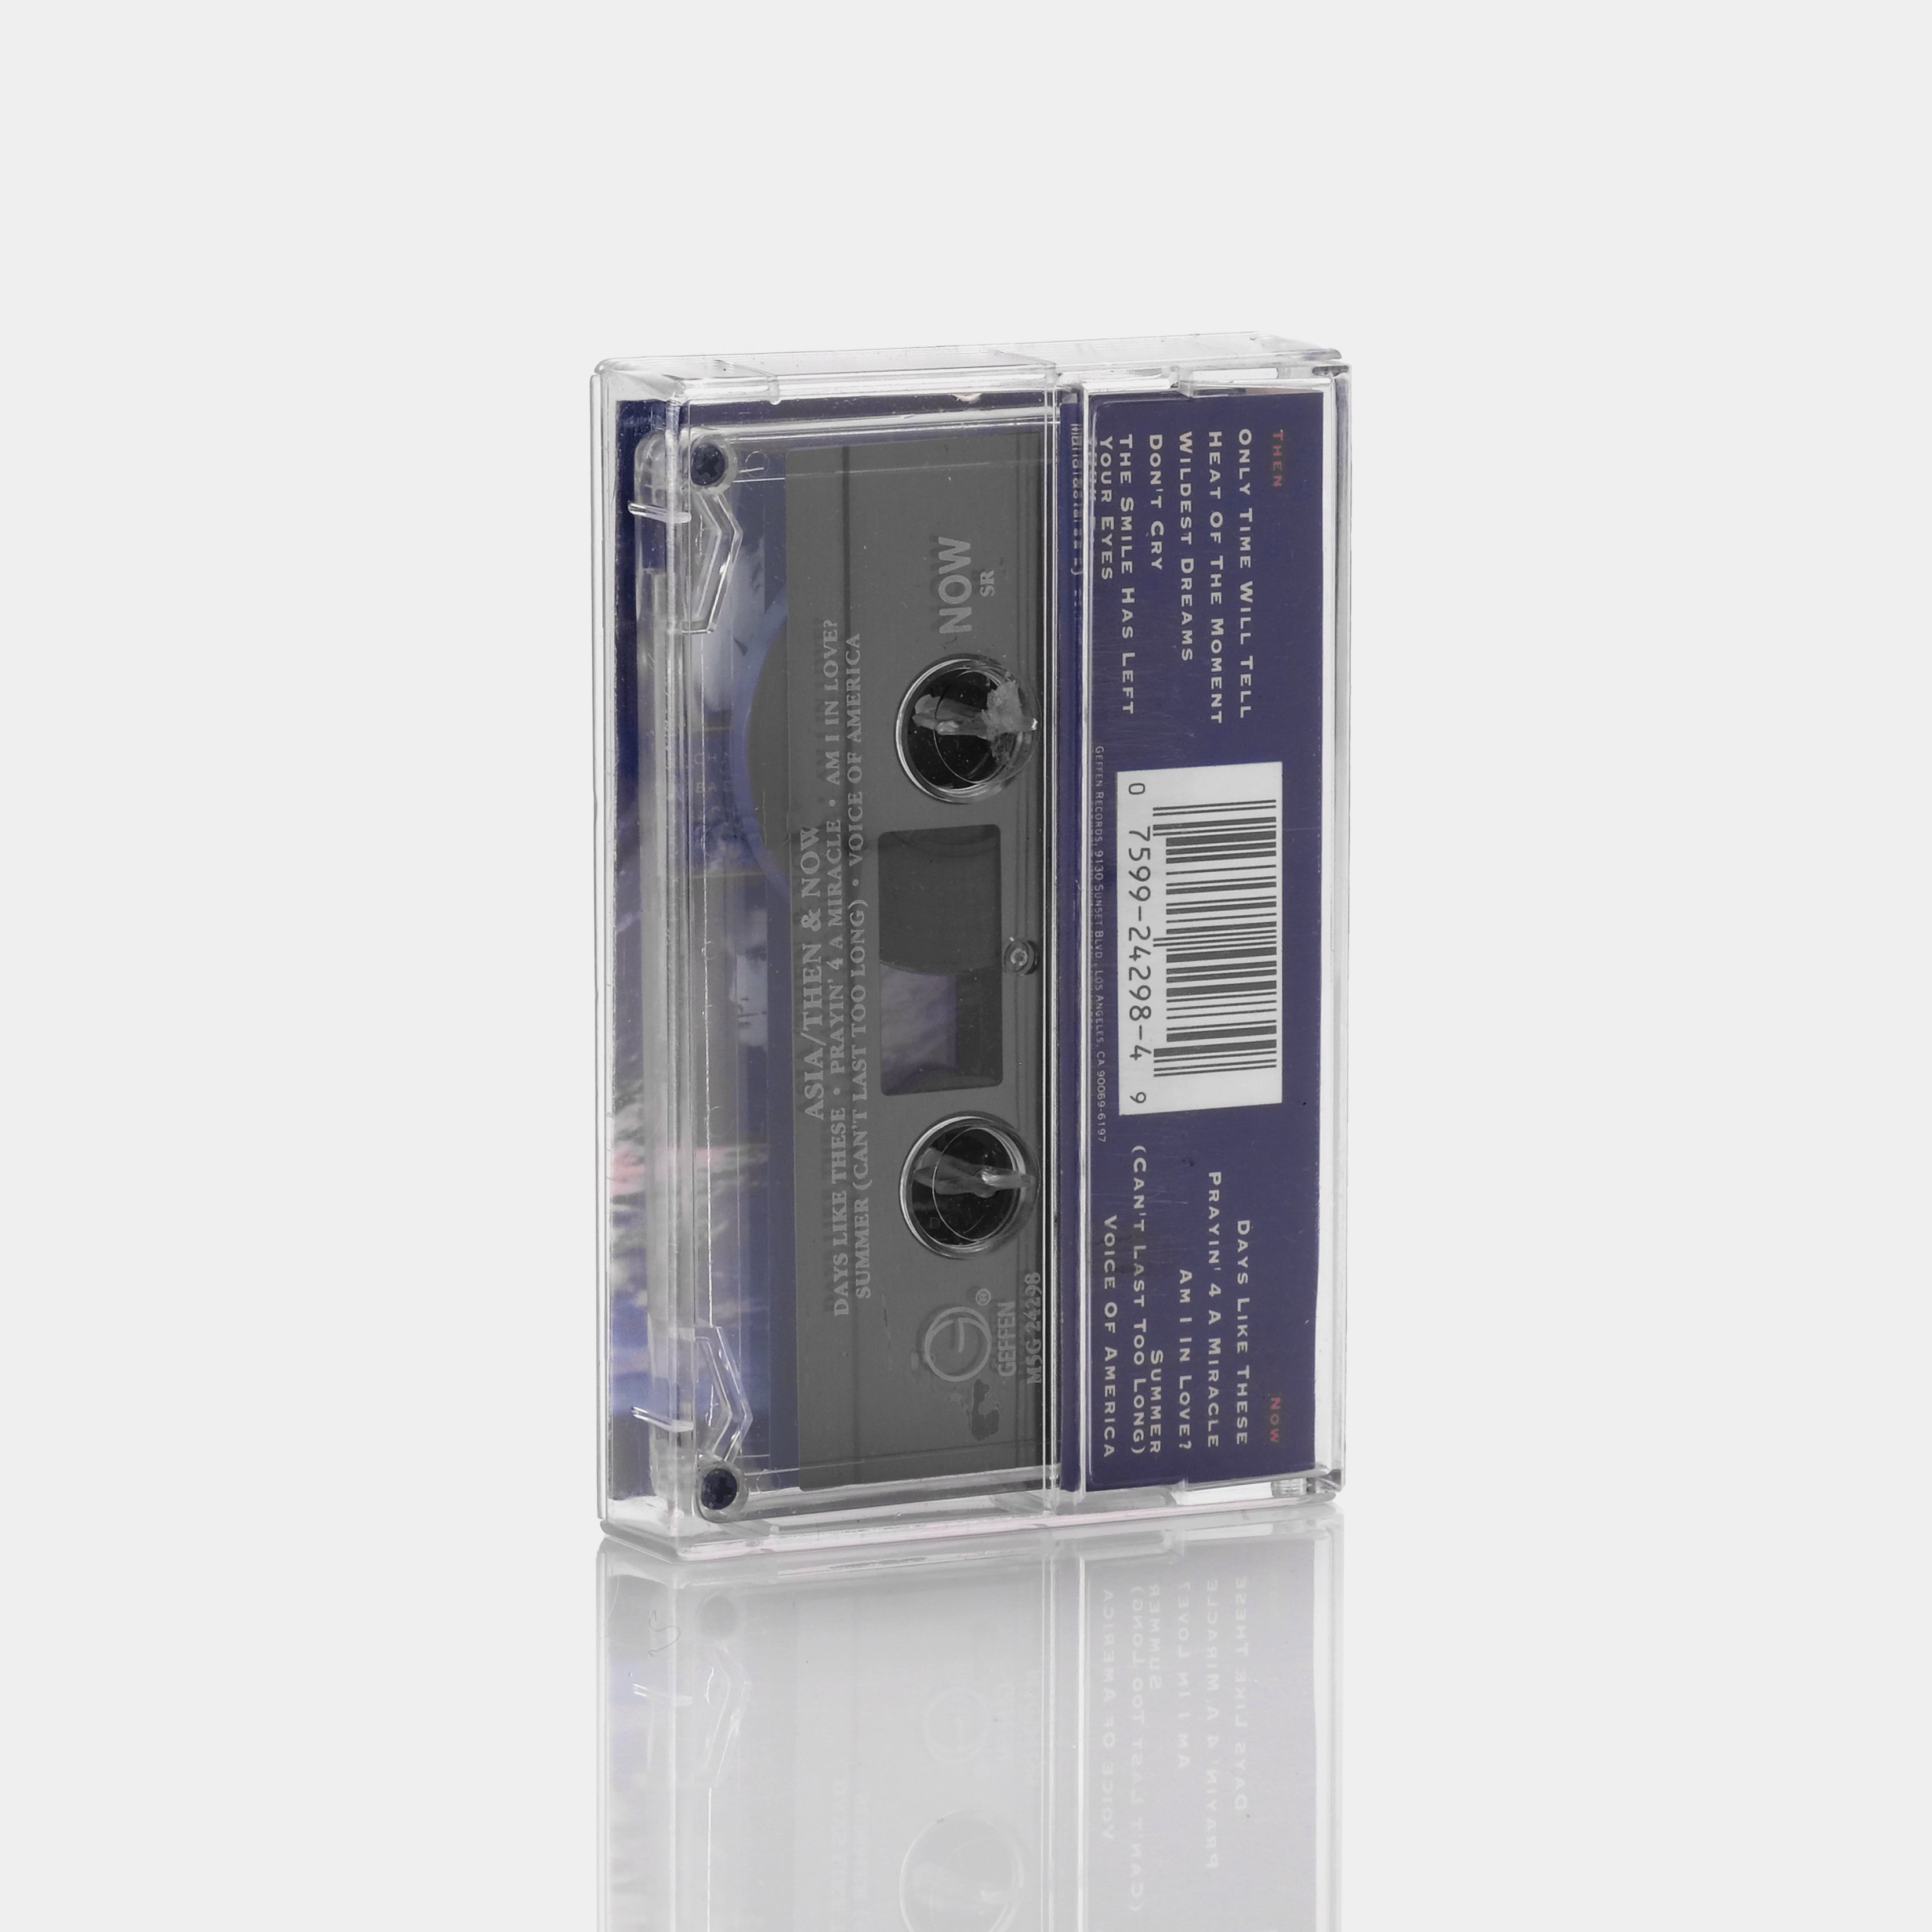 Asia - Then & Now Cassette Tape